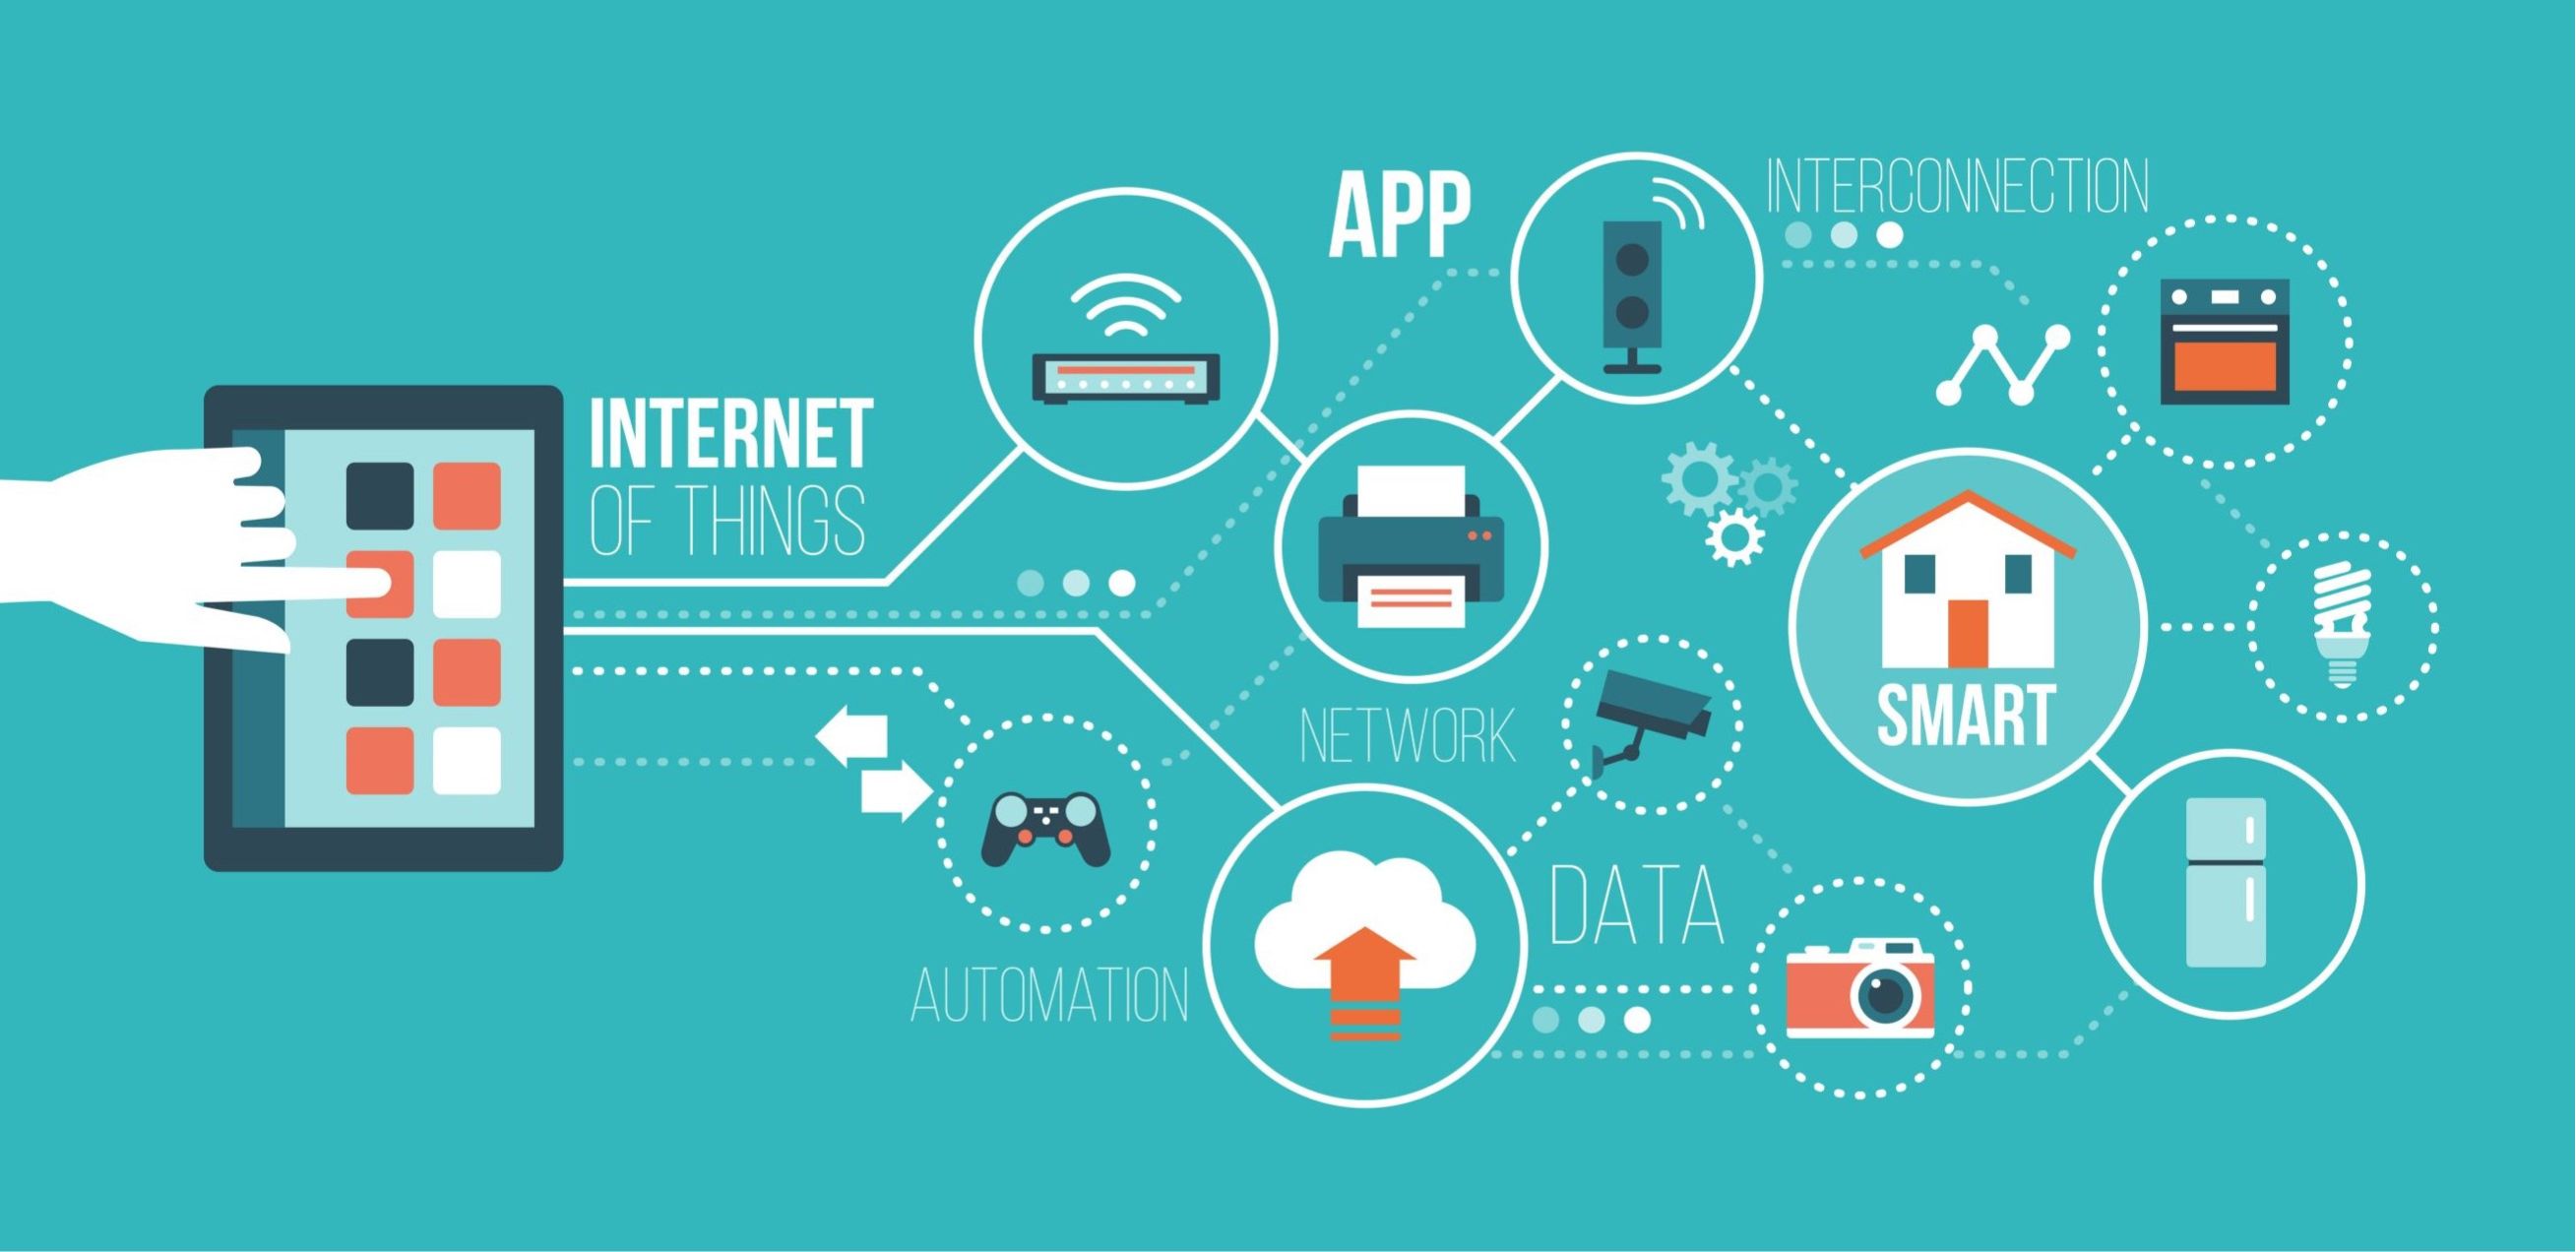 What Are Some Examples Of IoT (Internet Of Things)